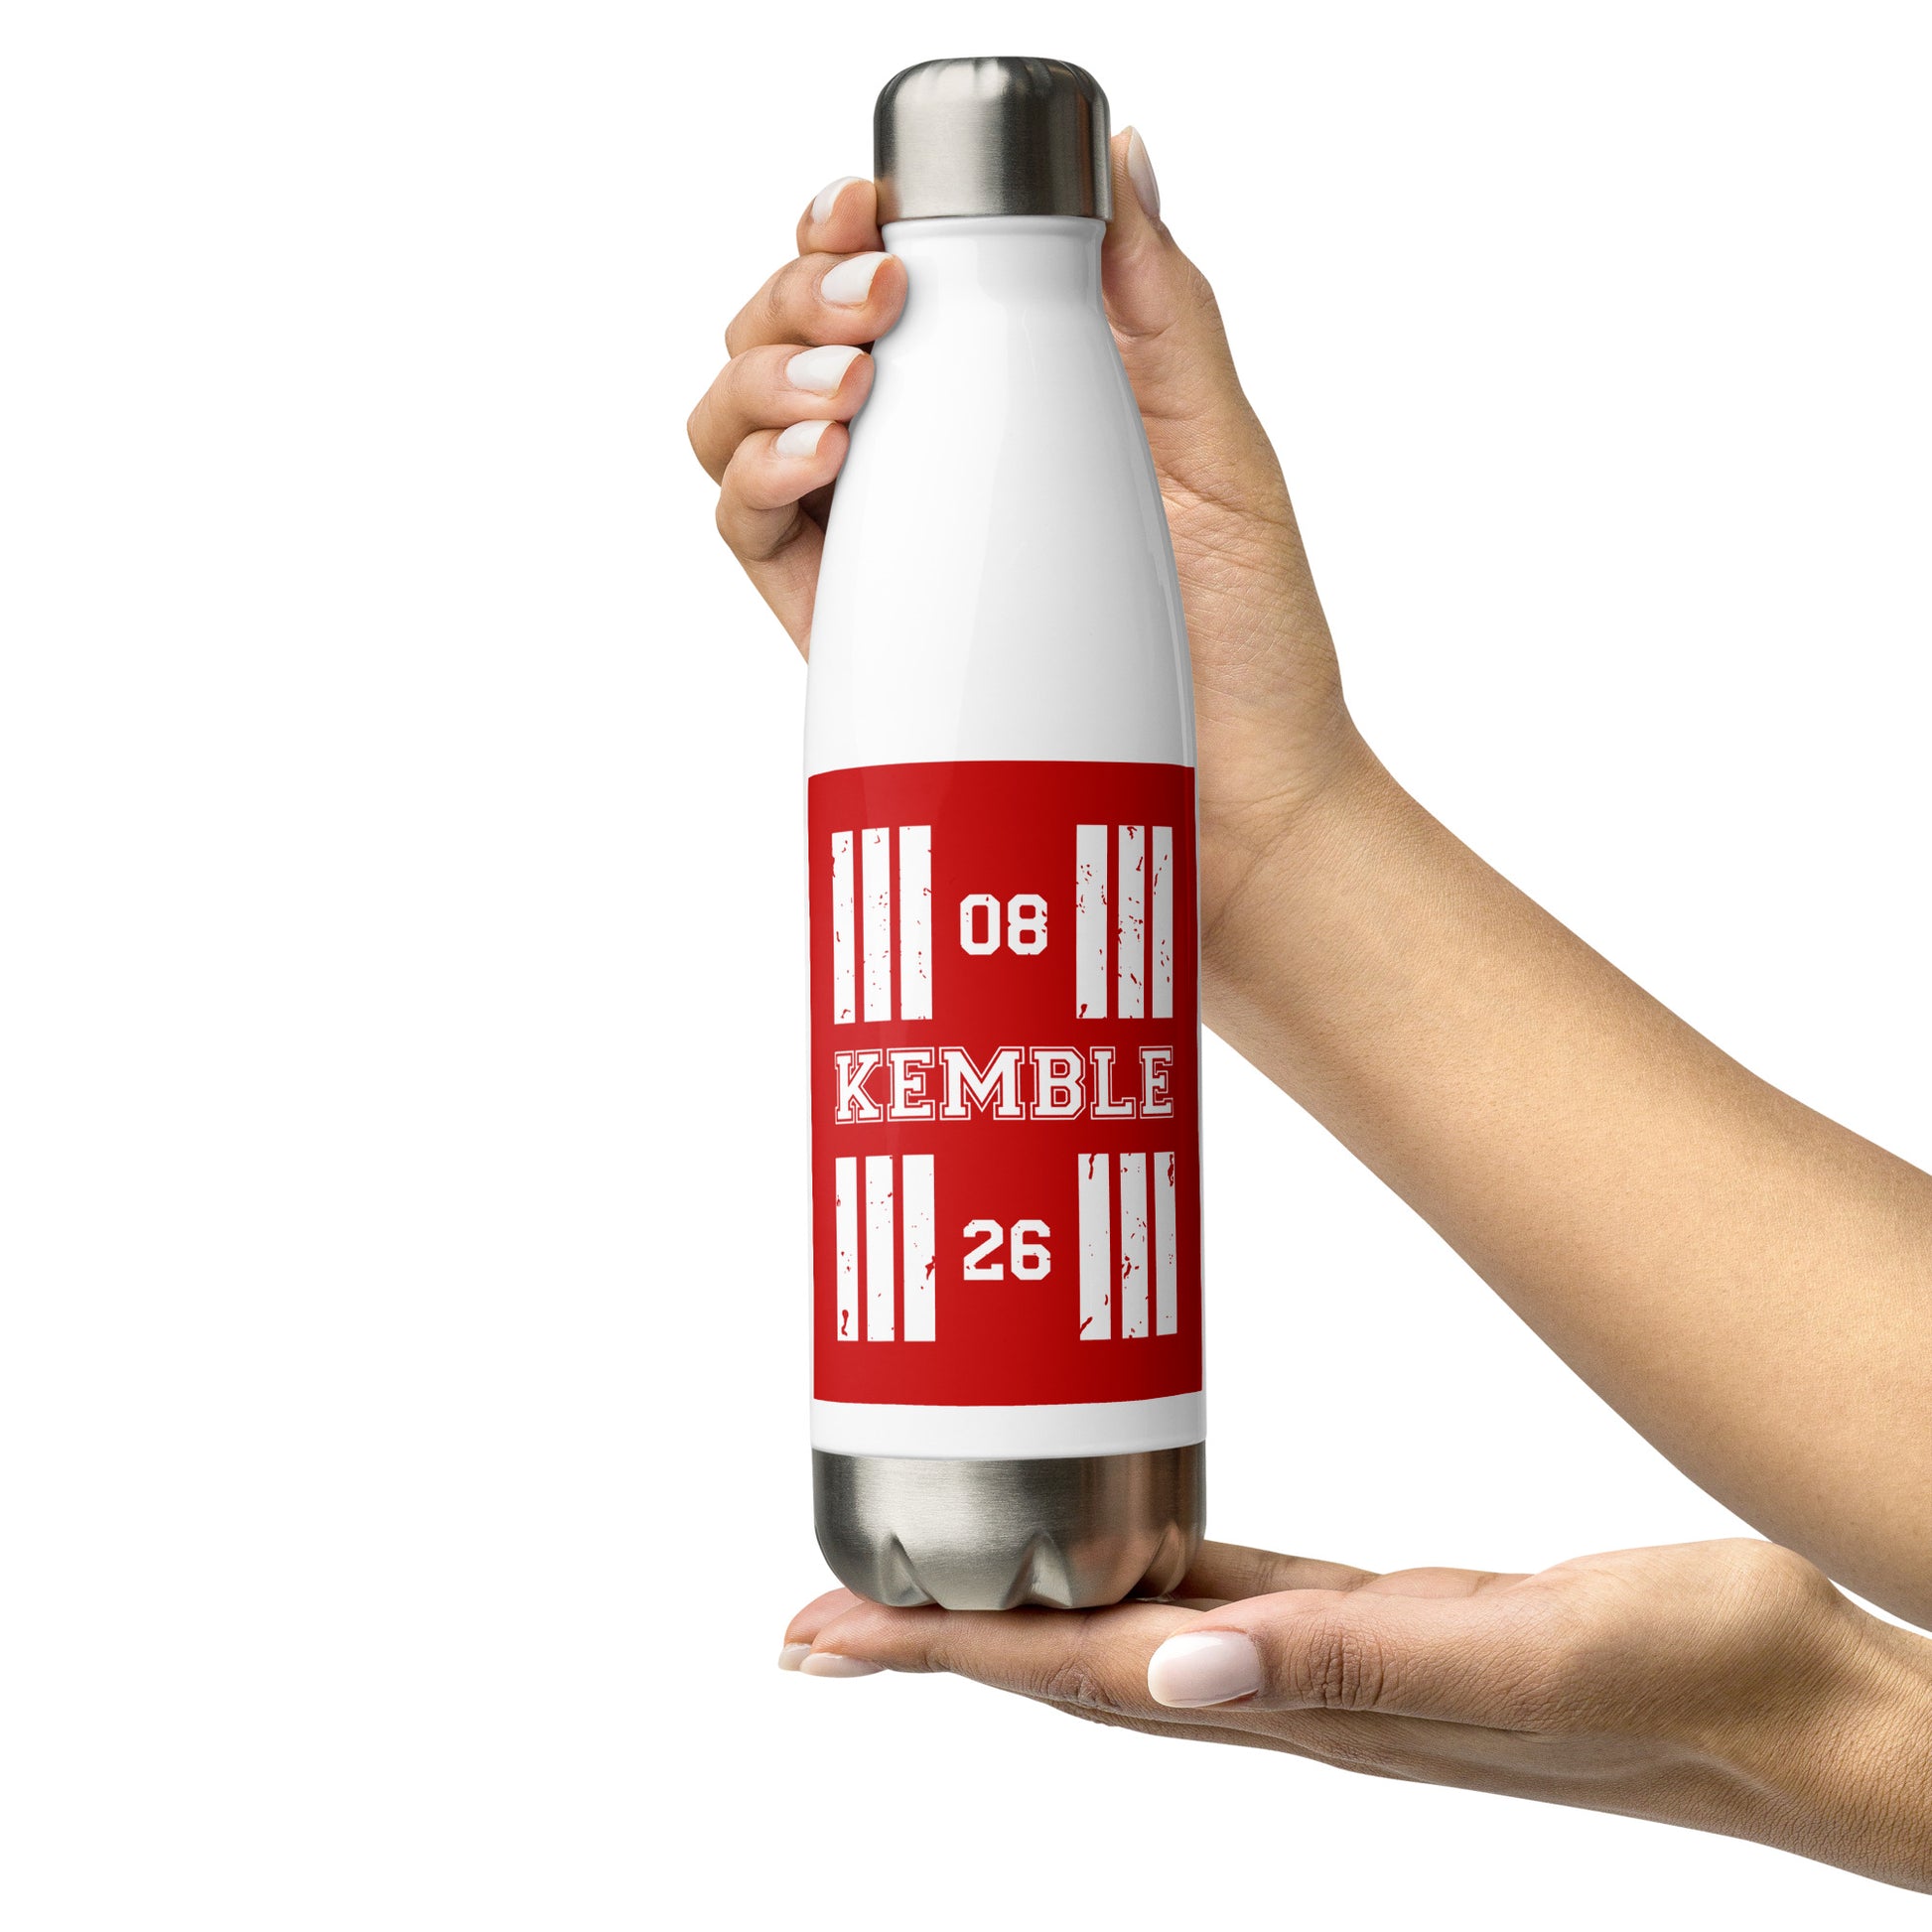 The Kemble Airfield runway designator water bottle features a red print with the airport's name and designator framed by stylised threshold markings showing through.